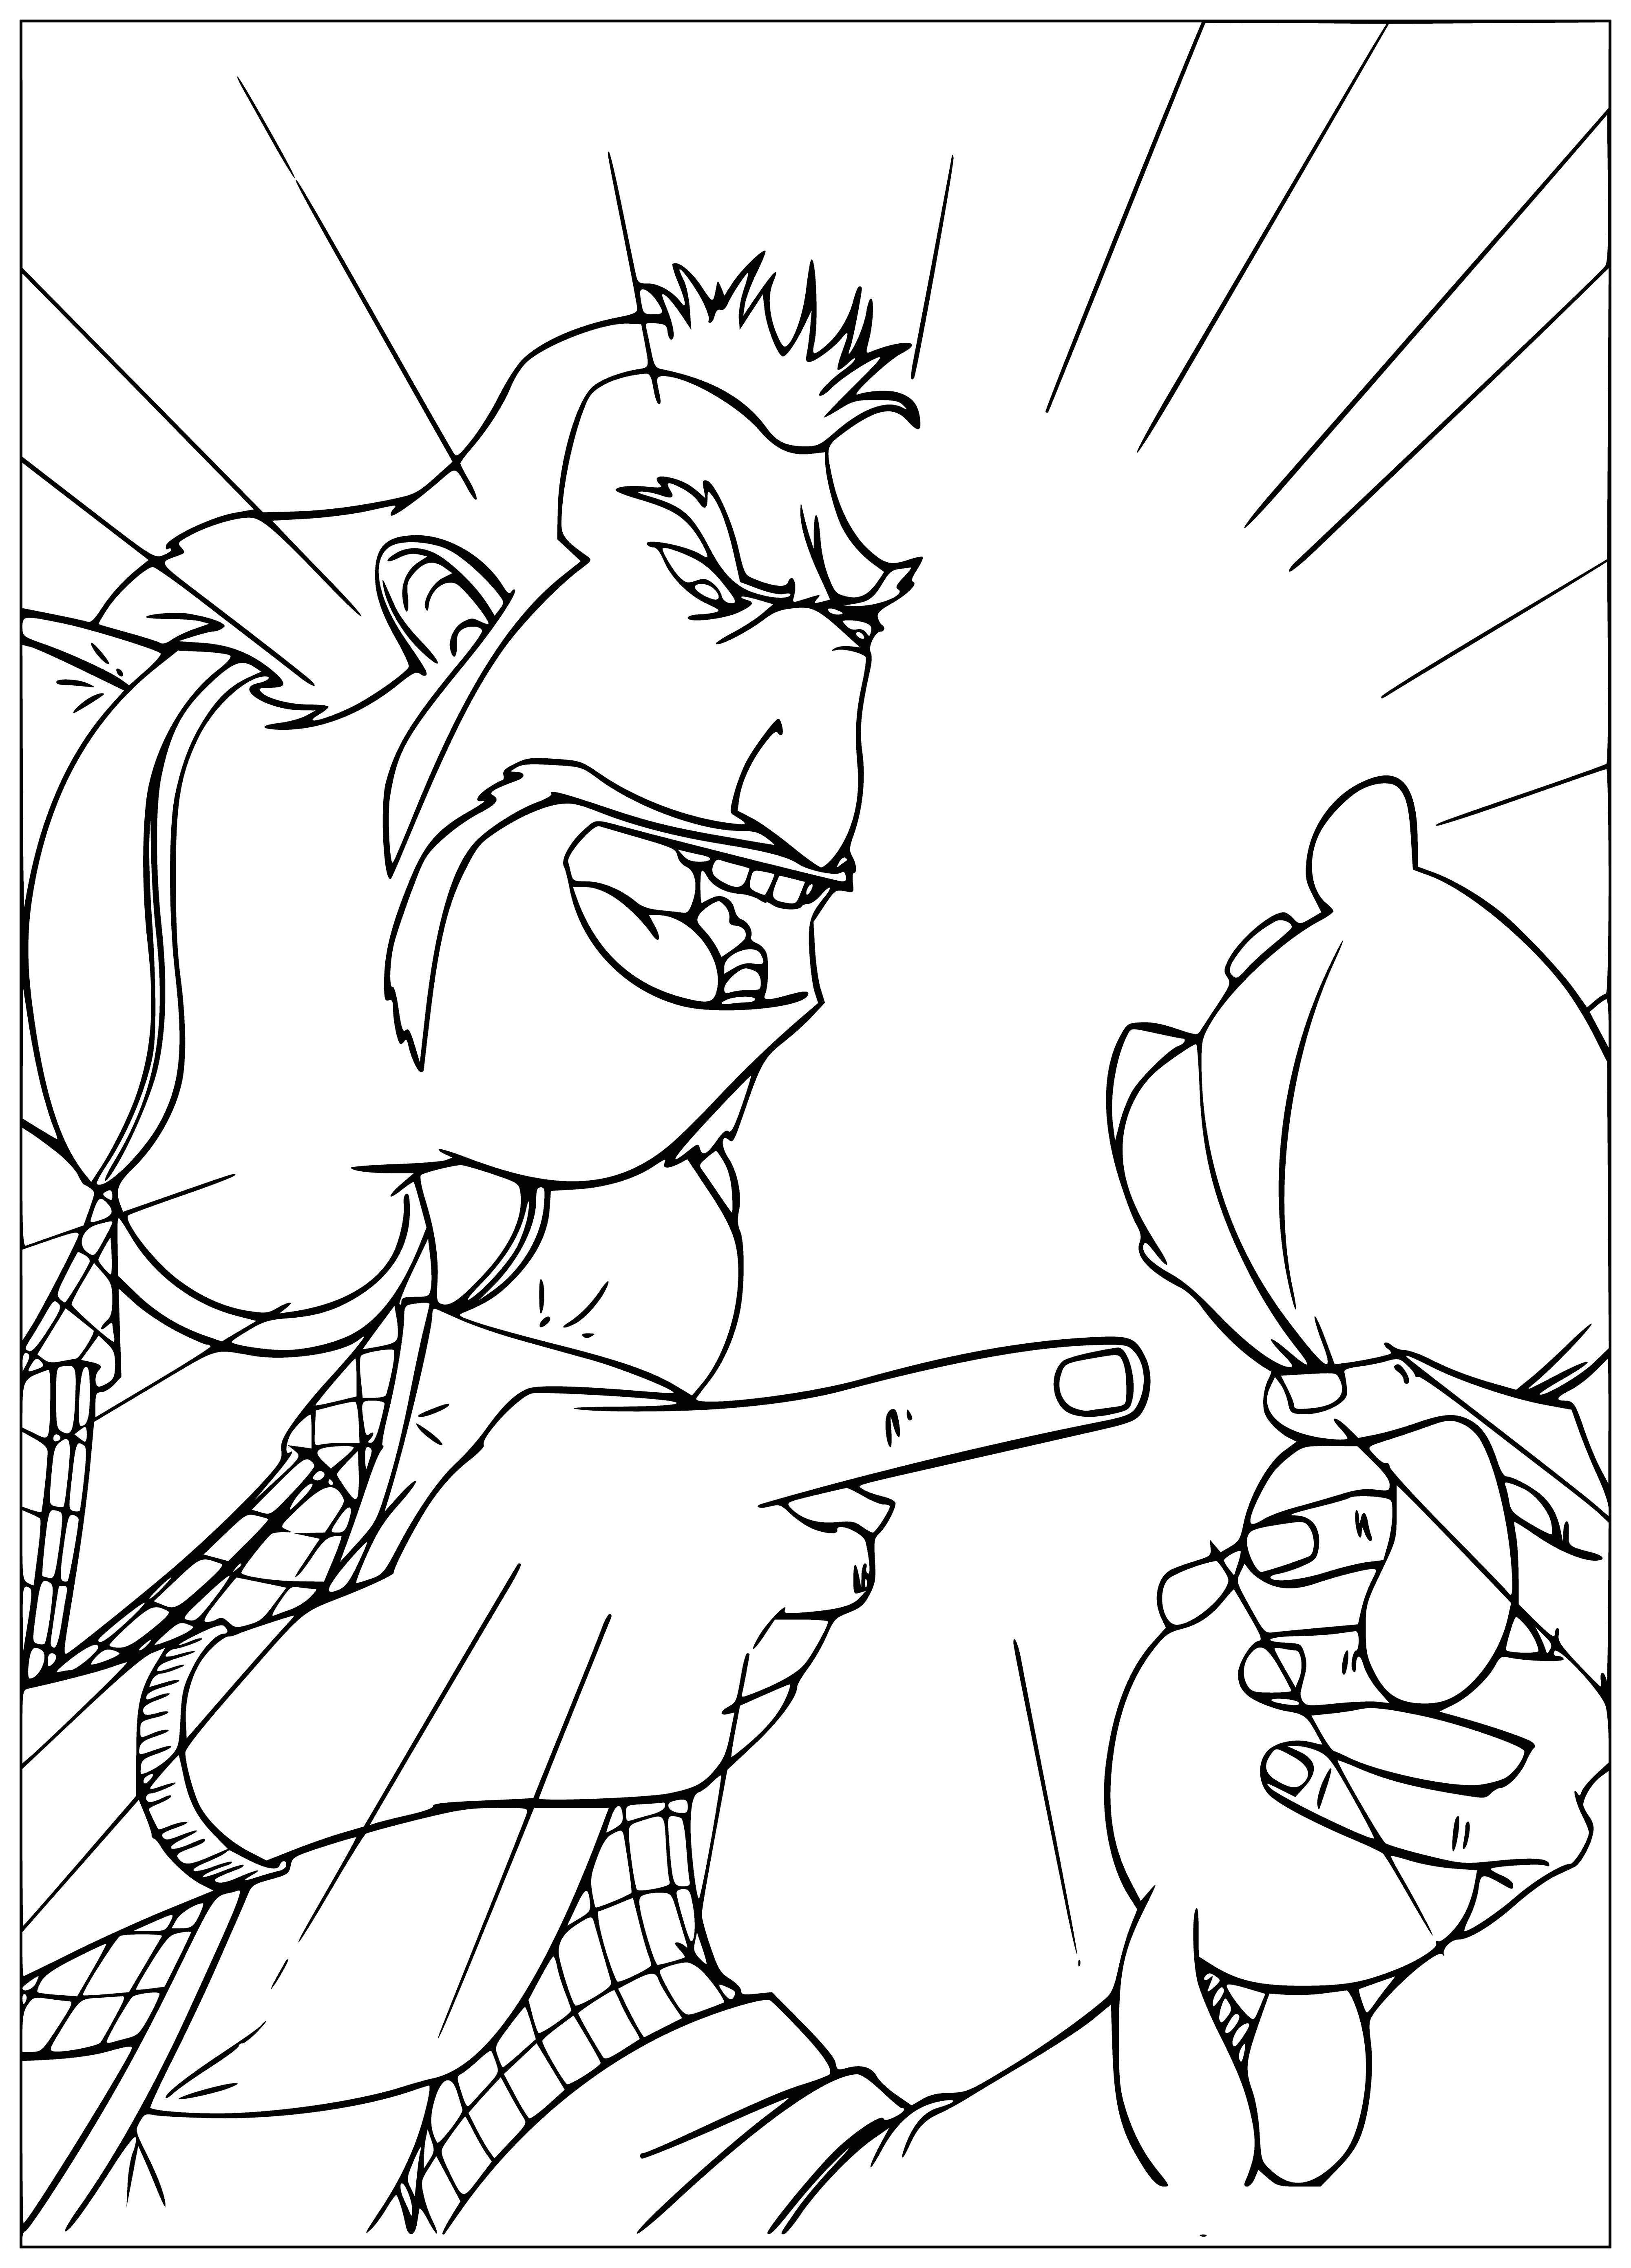 Chief hunter coloring page